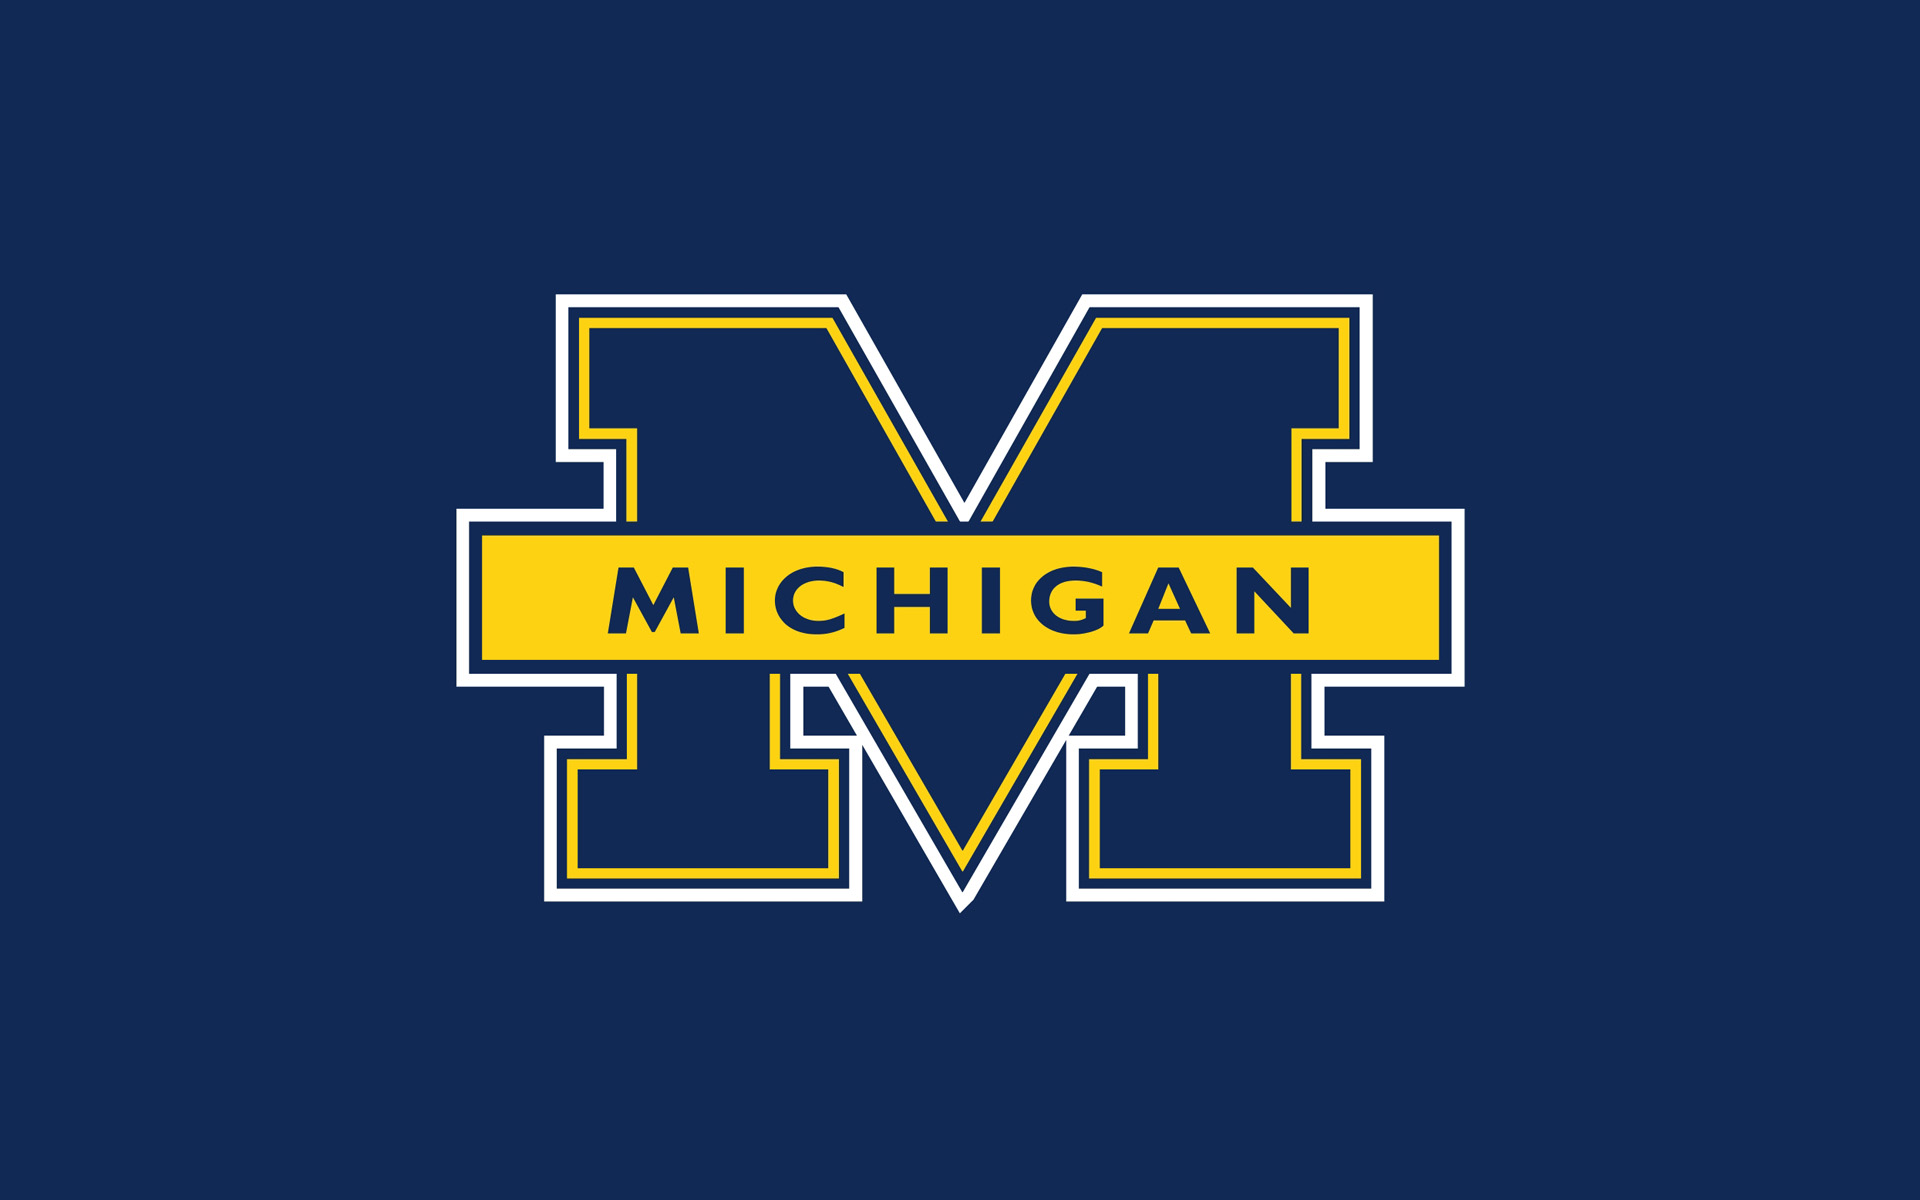 Dissertation abstracts online university of michigan